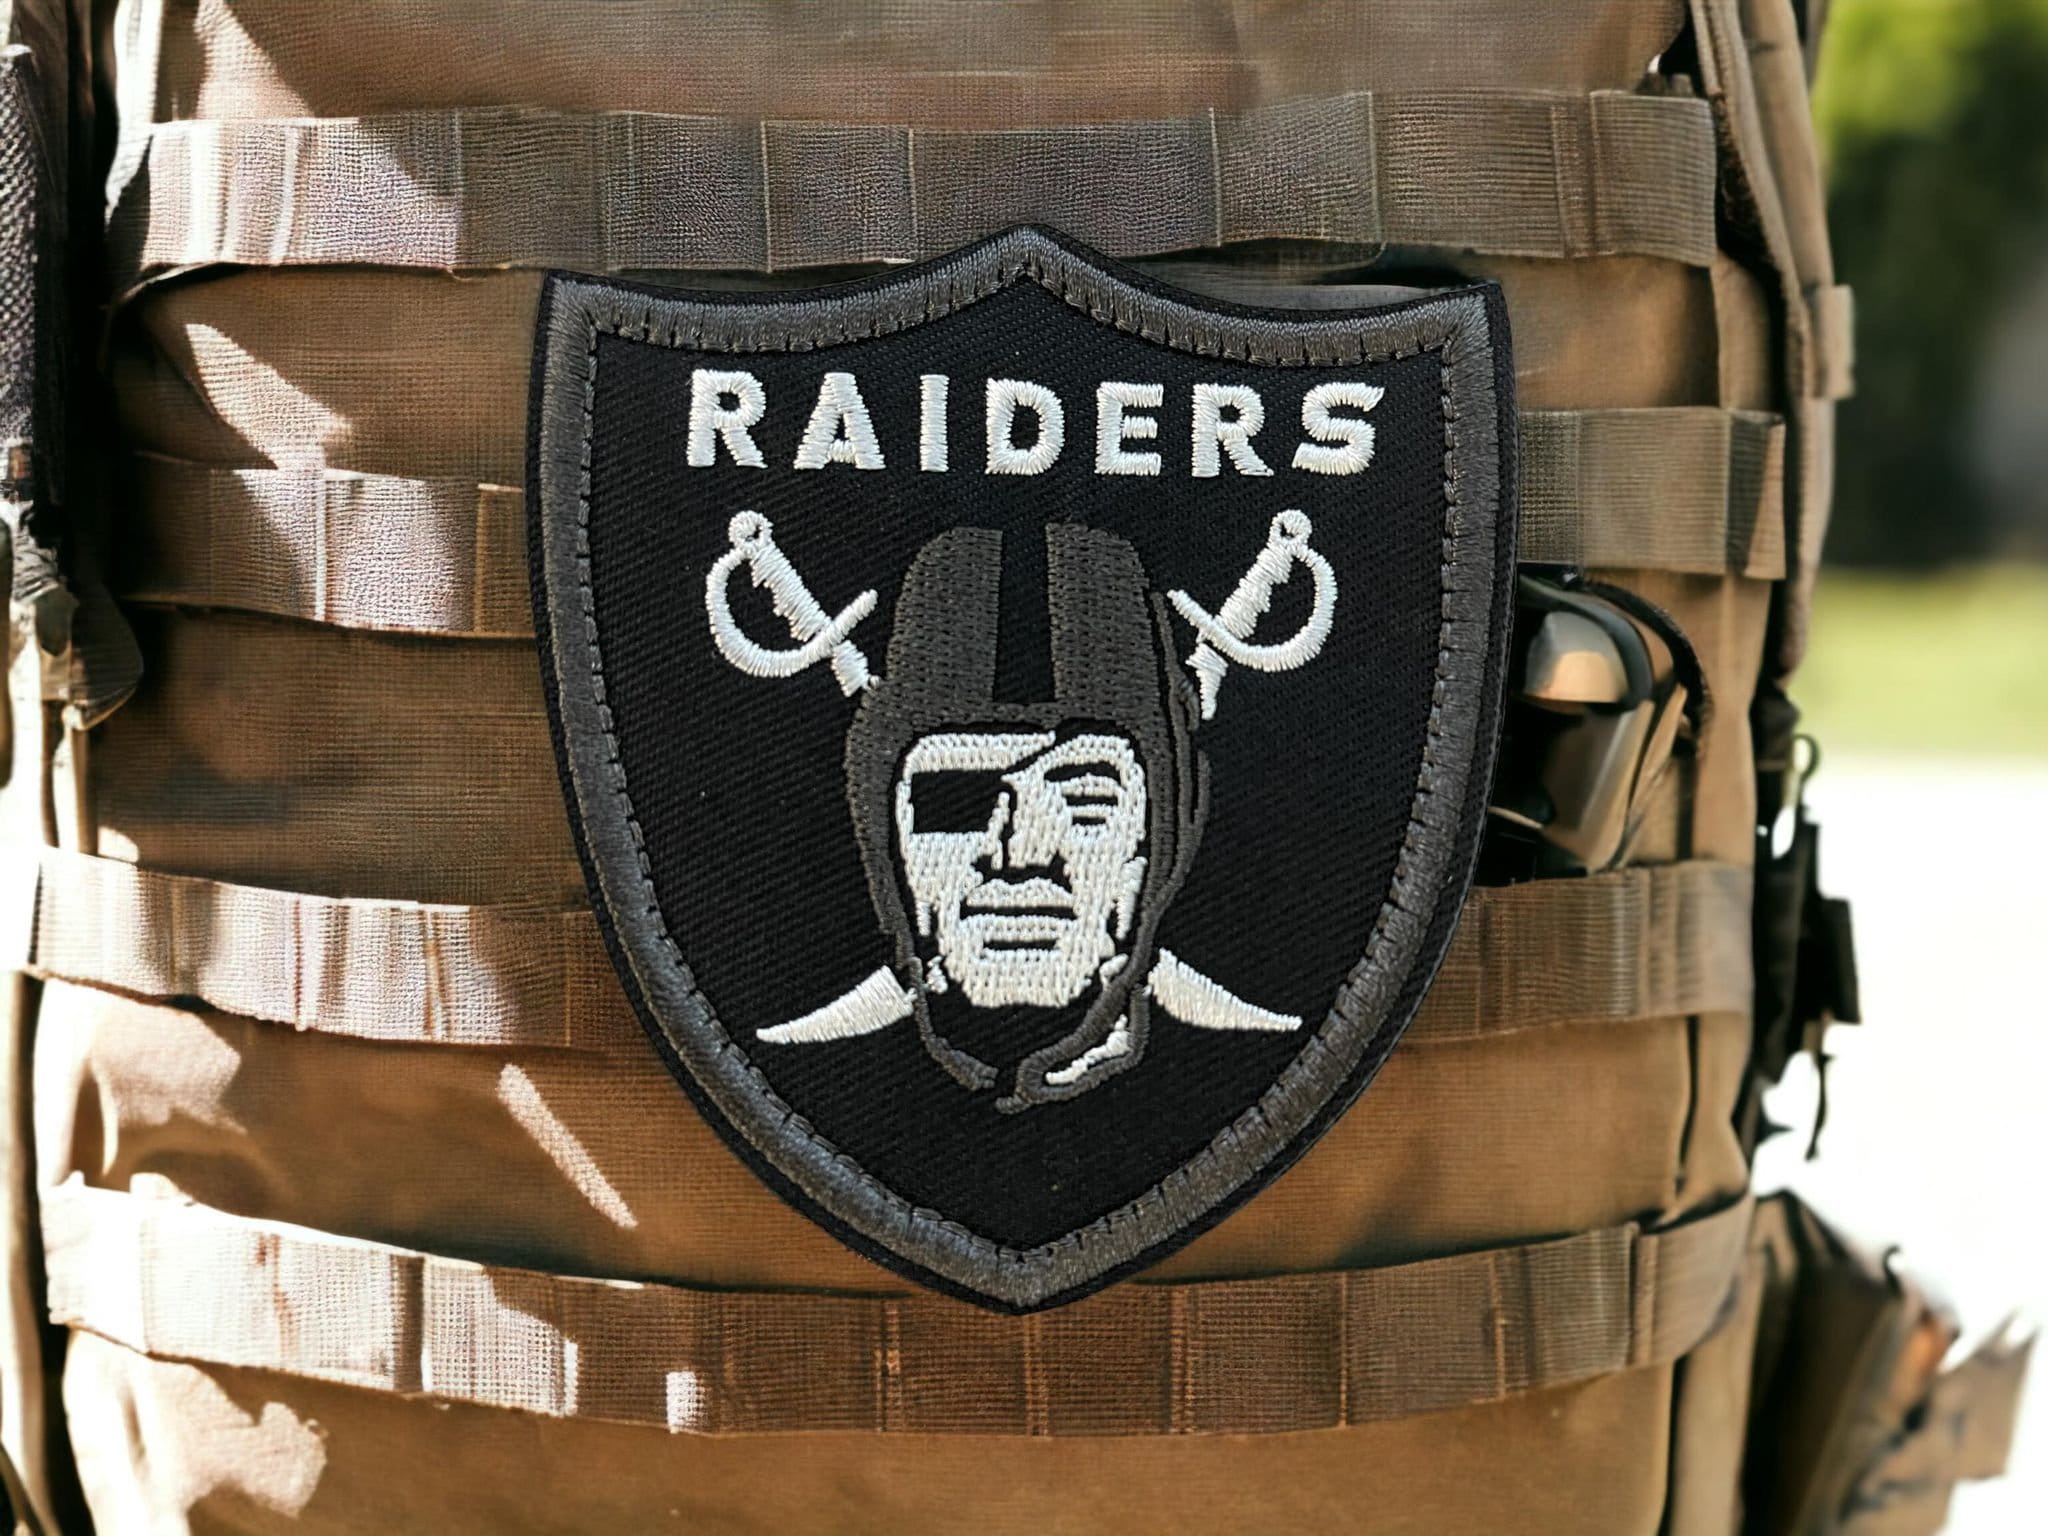  New Raiders Embroidery Patch Military Tactical Clothing  Accessory Backpack Armband Sticker Gift Patch Decorative Patch Embroidered  Patch (2pcs) : Arts, Crafts & Sewing